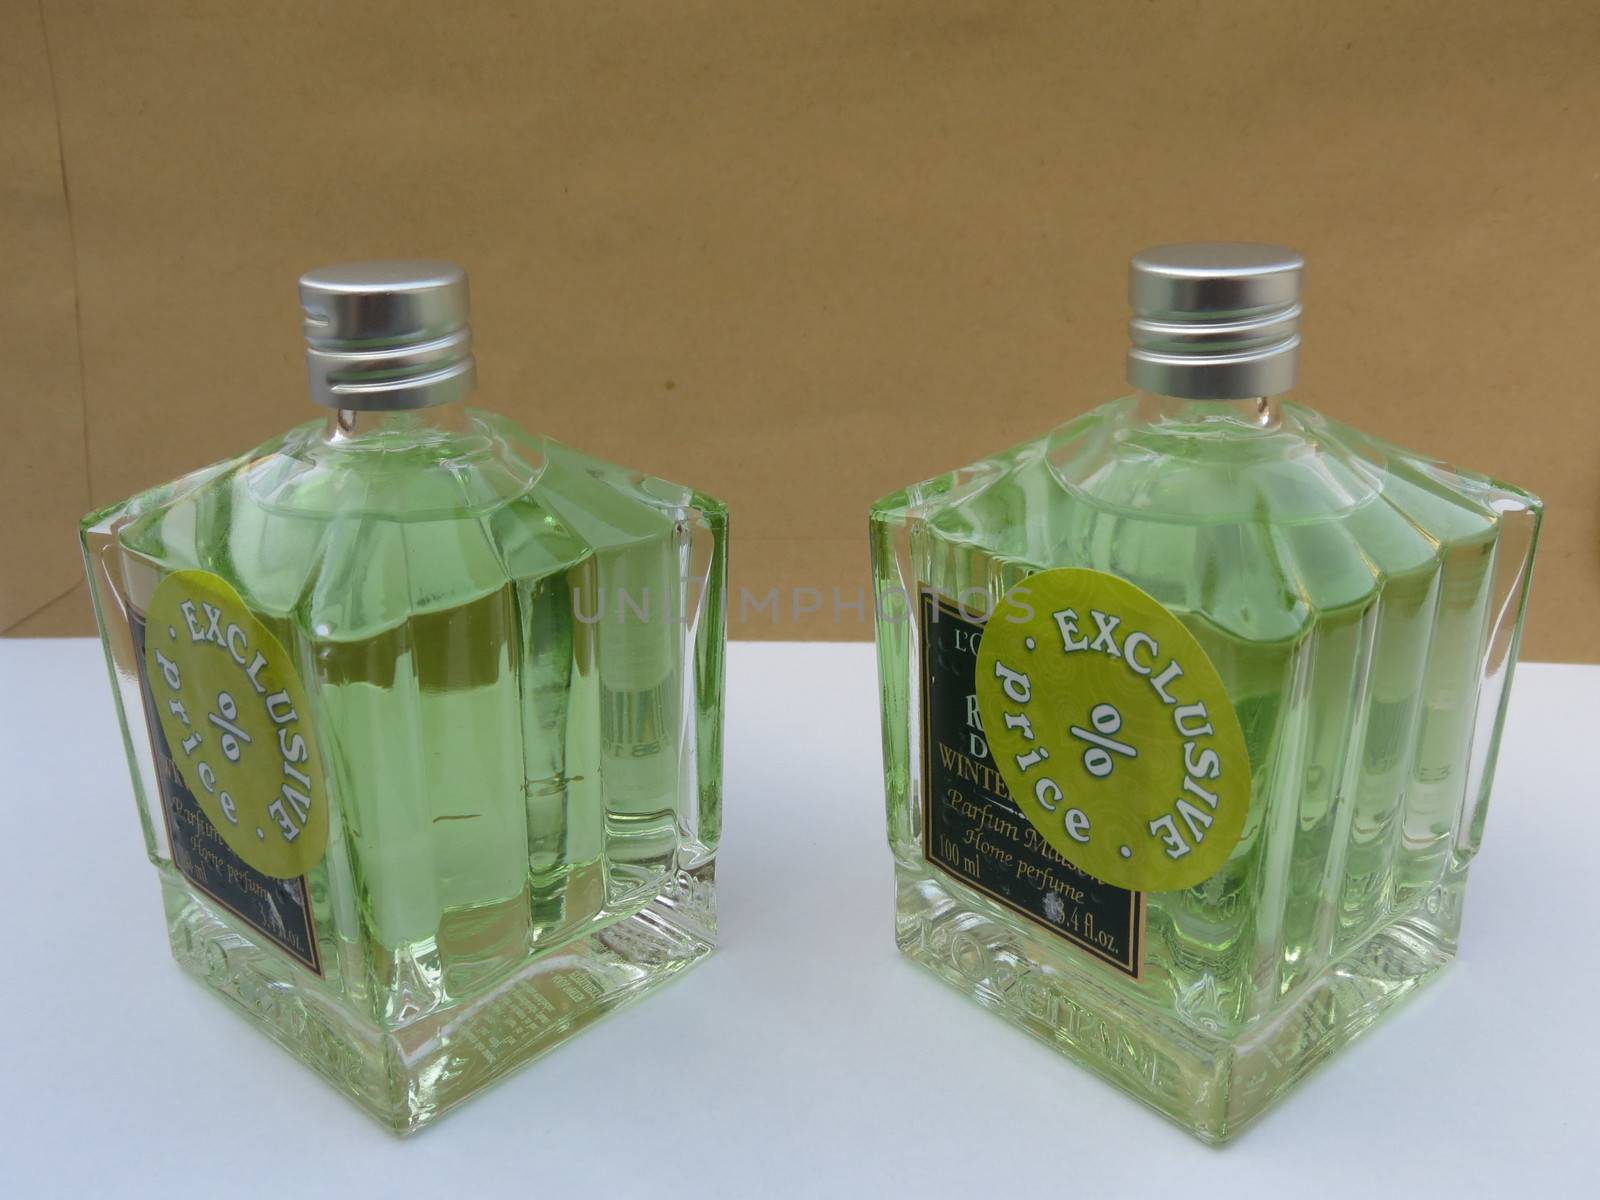 L'Occitane en Provence house fragrance by paolo77